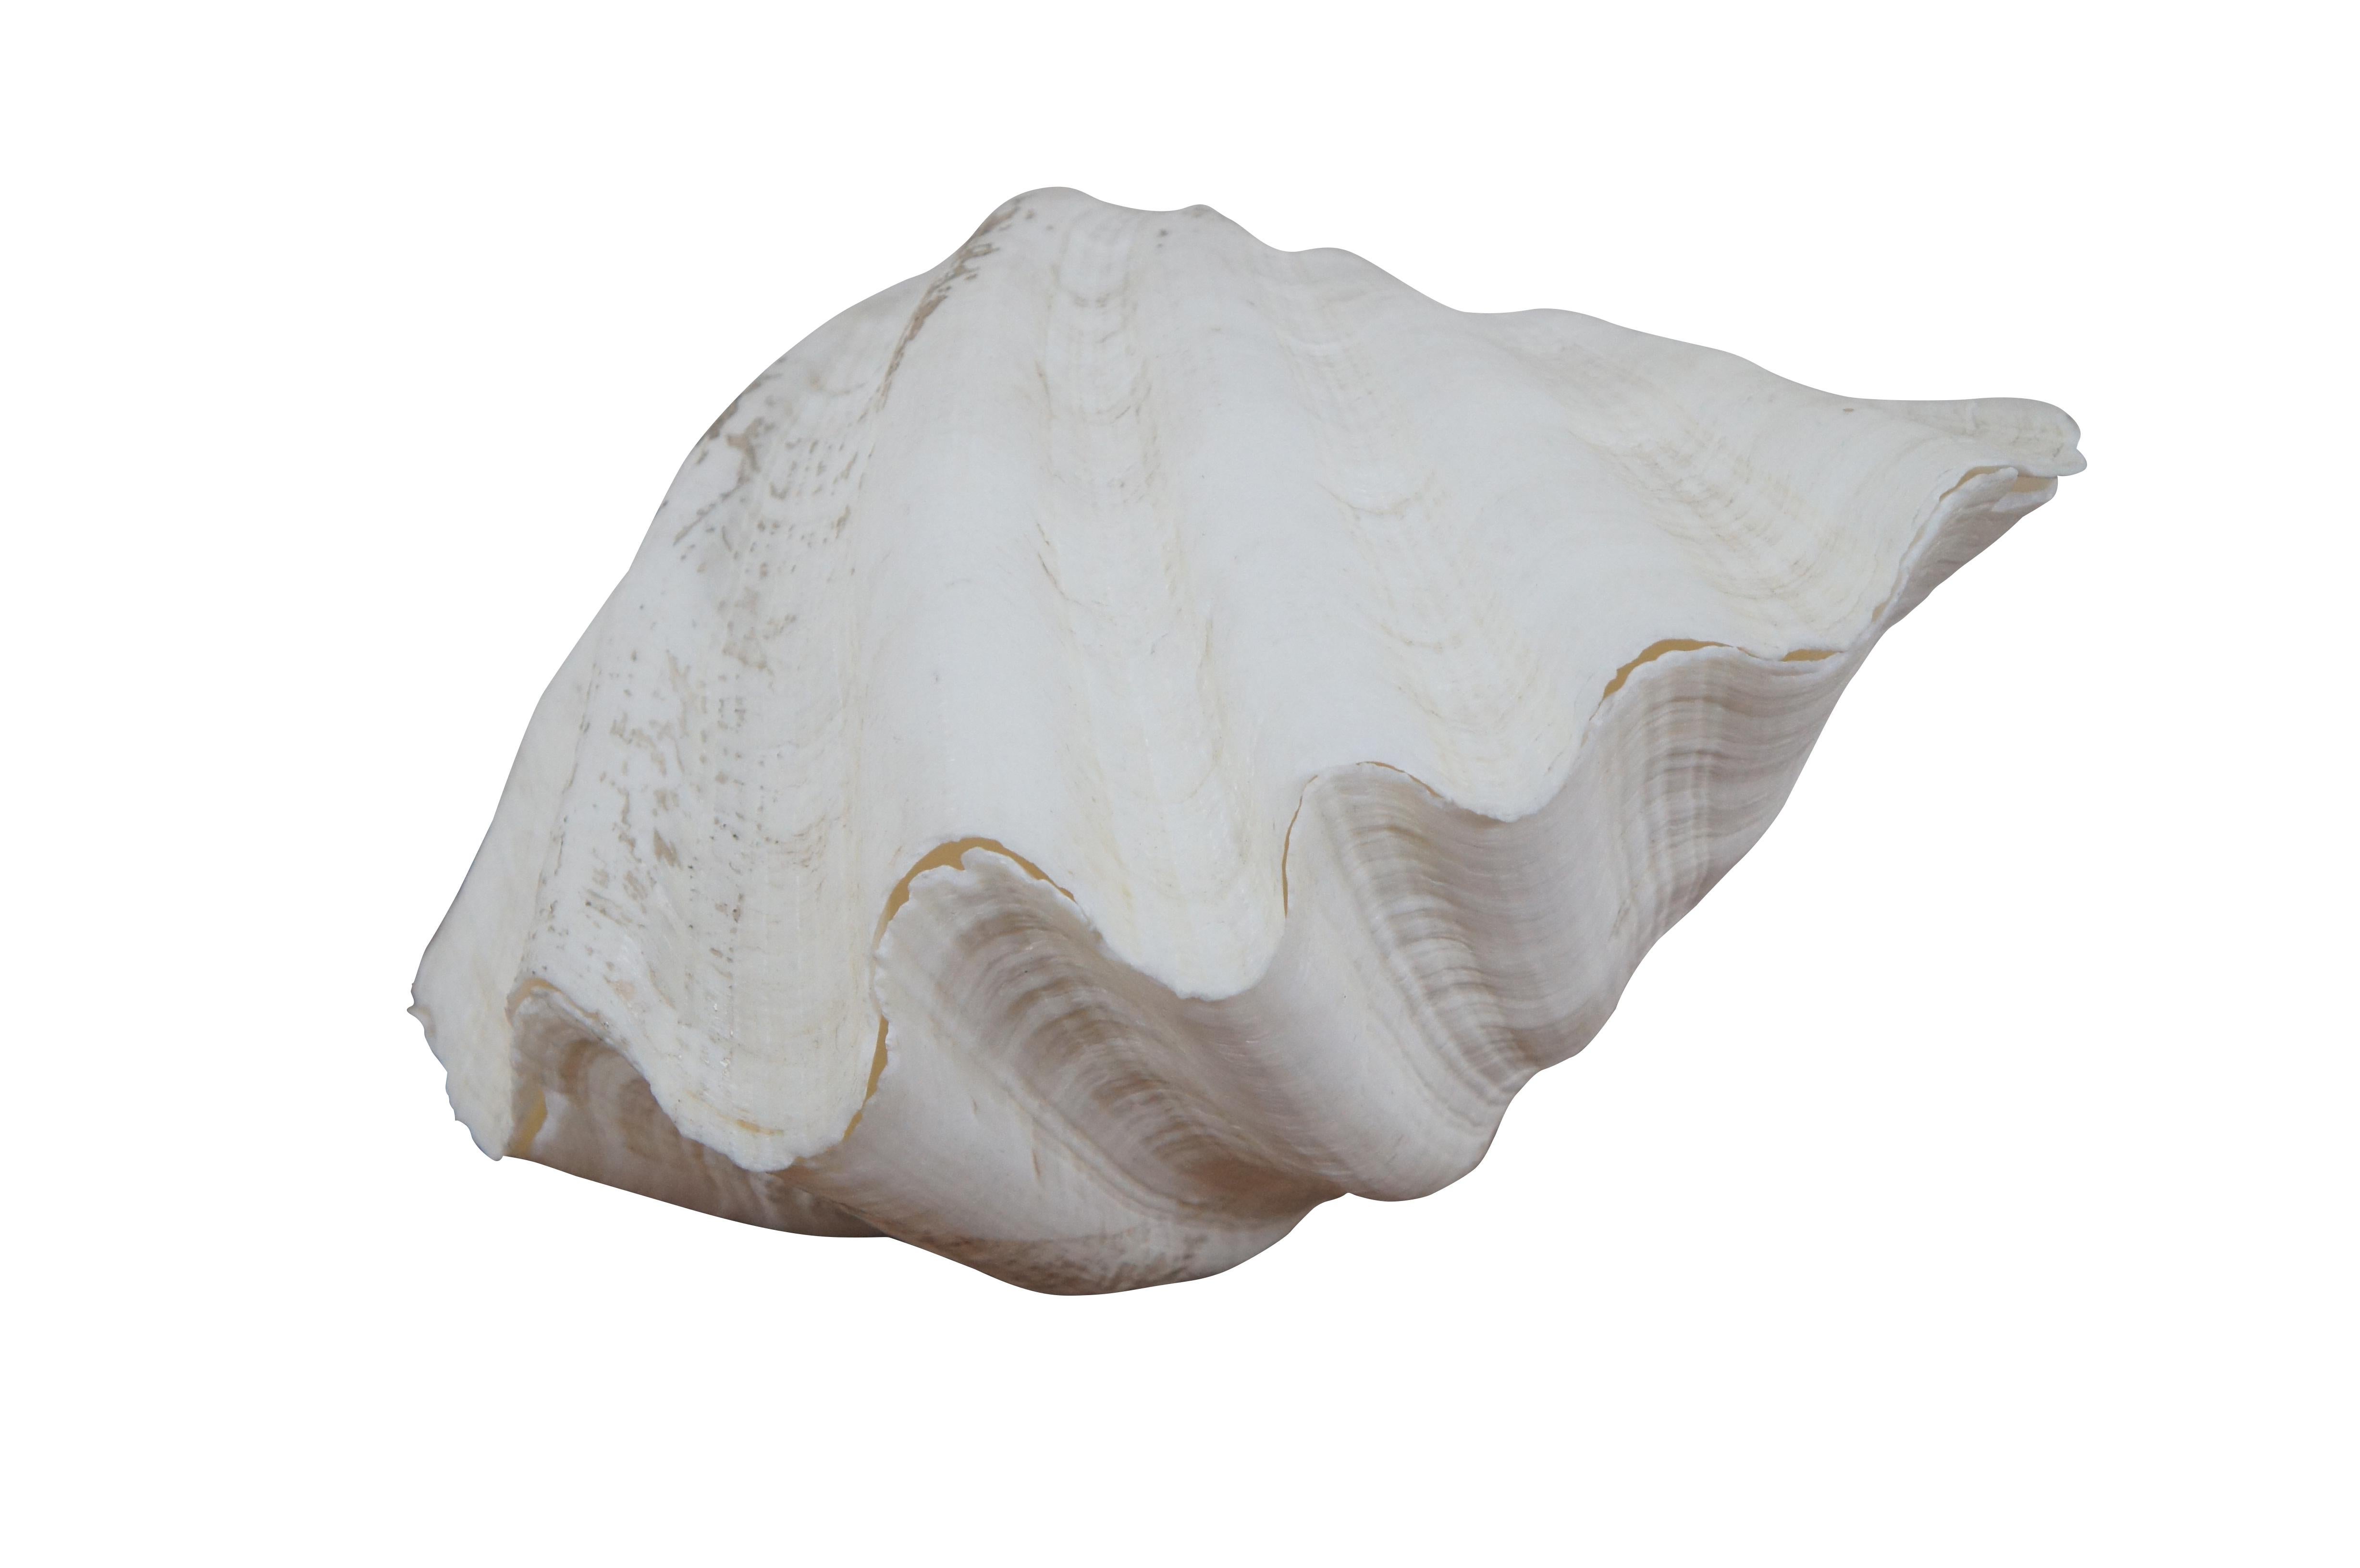 Beautiful complete natural specimen, Tridacna Gigantas / Giant Clam shell / fossil featuring matching top and bottom halves. White in color. Seven folds.  Nautical, Maritime, beach decor.

